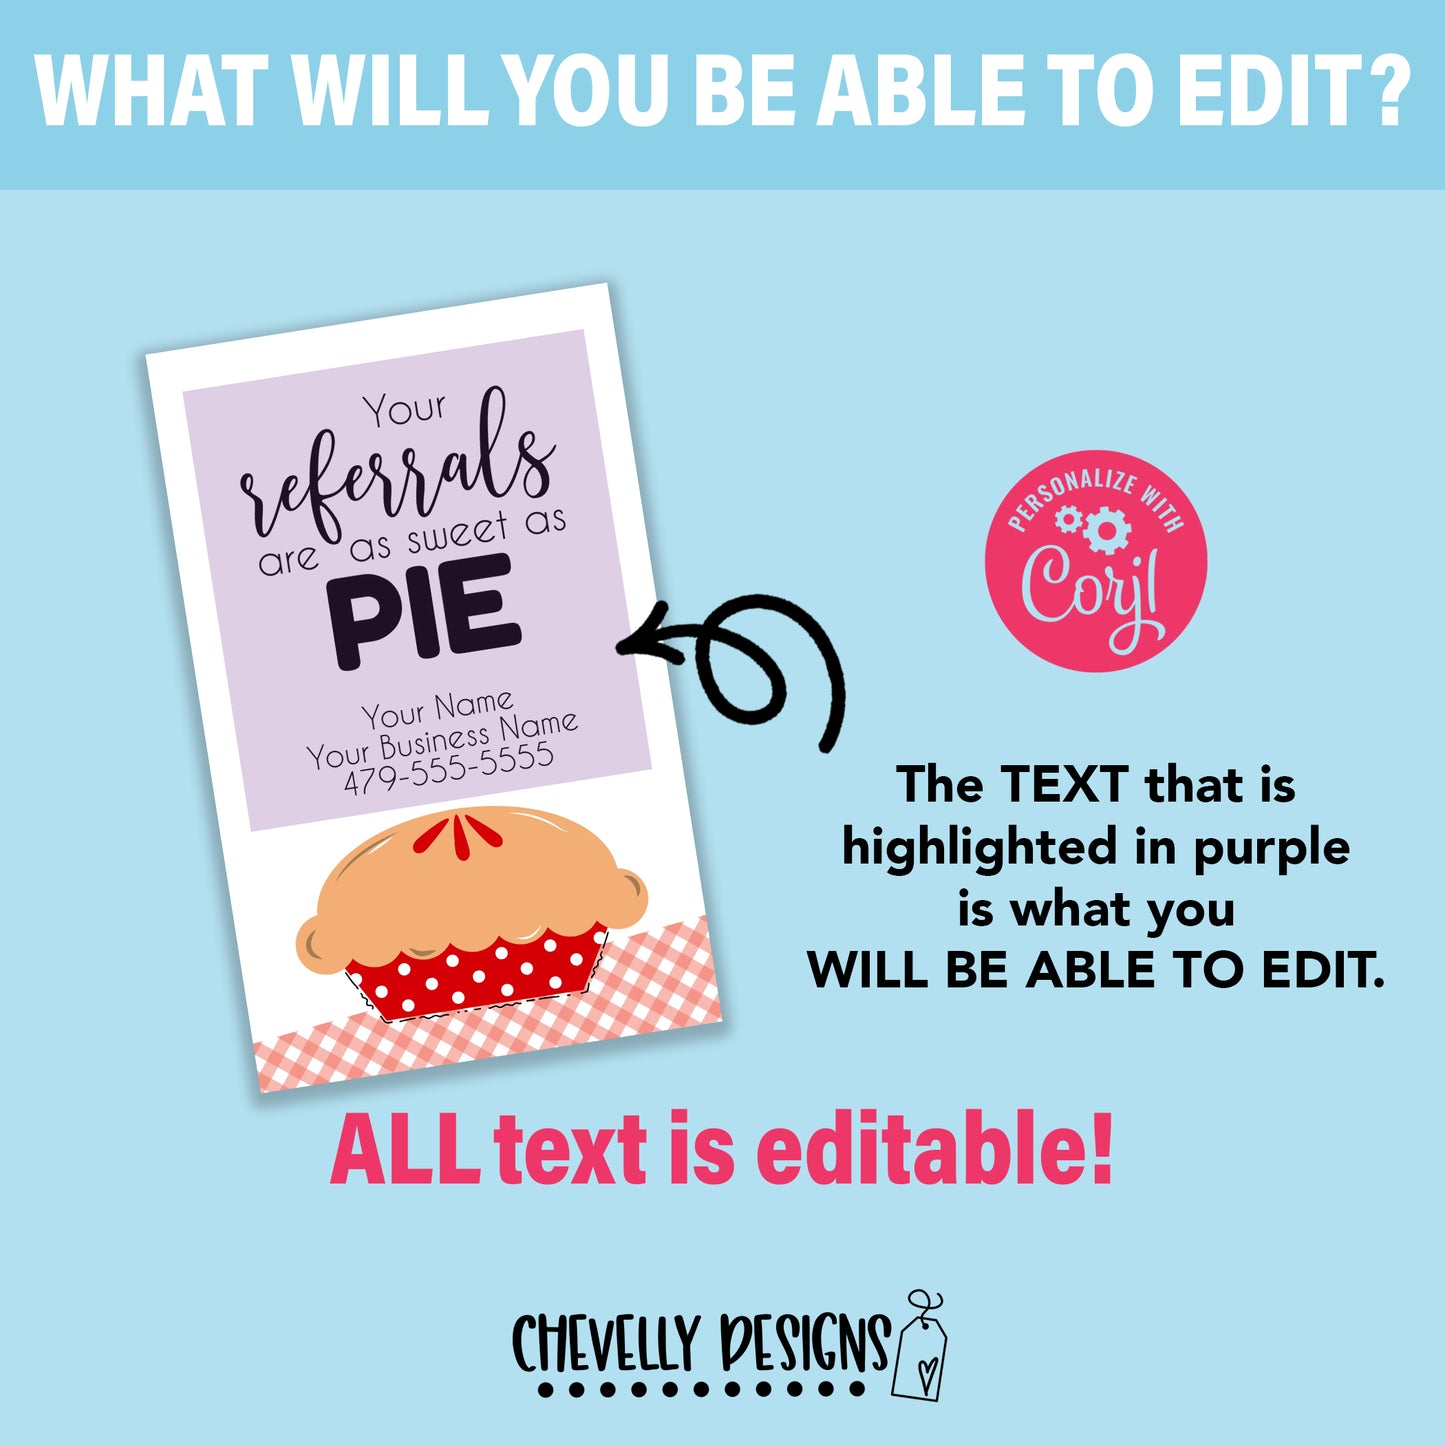 Editable - Your Referrals are as Sweet as Pie Gift Tags - Printable - Digital File